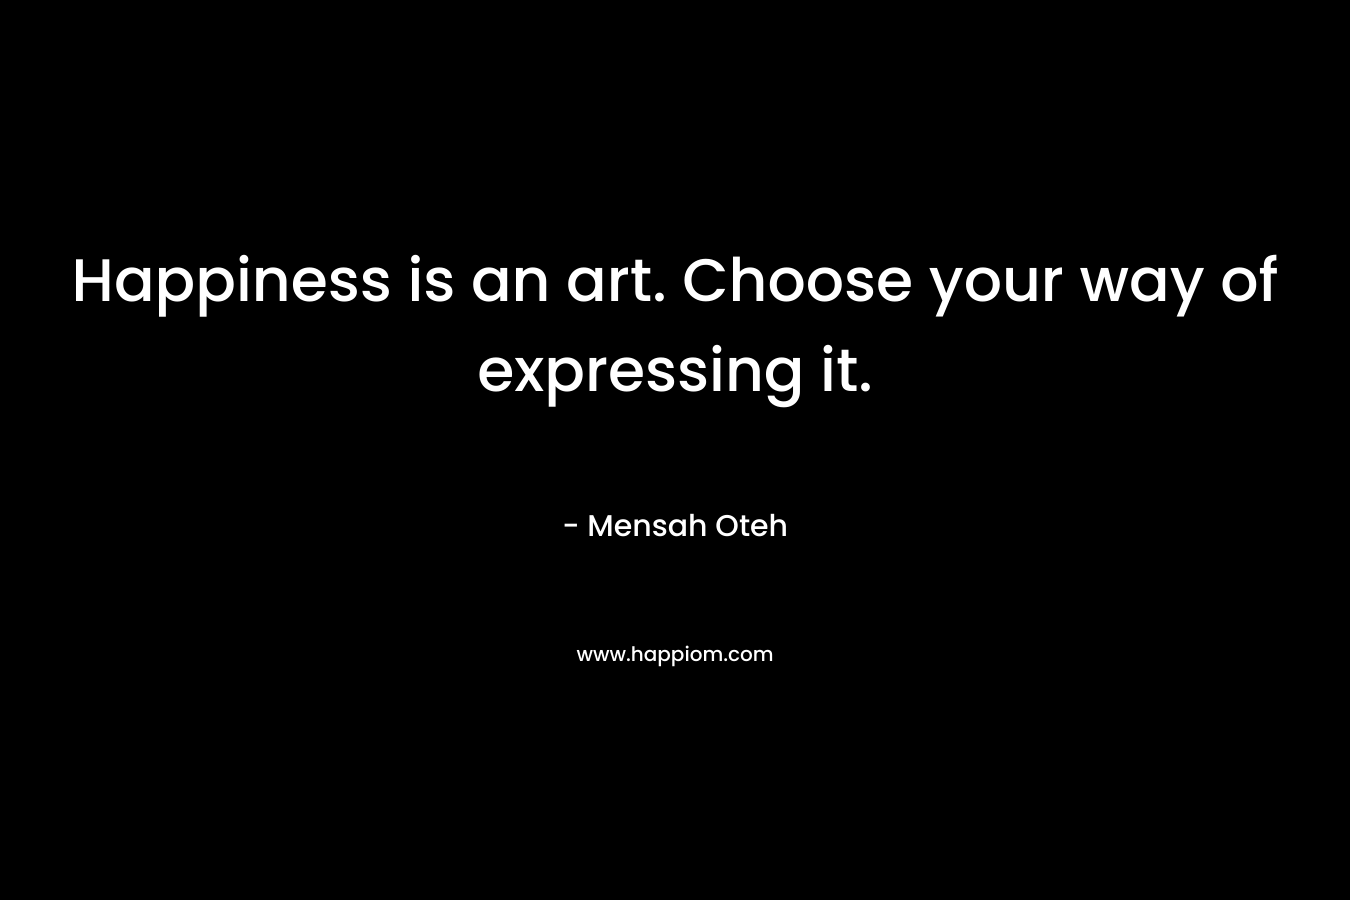 Happiness is an art. Choose your way of expressing it.